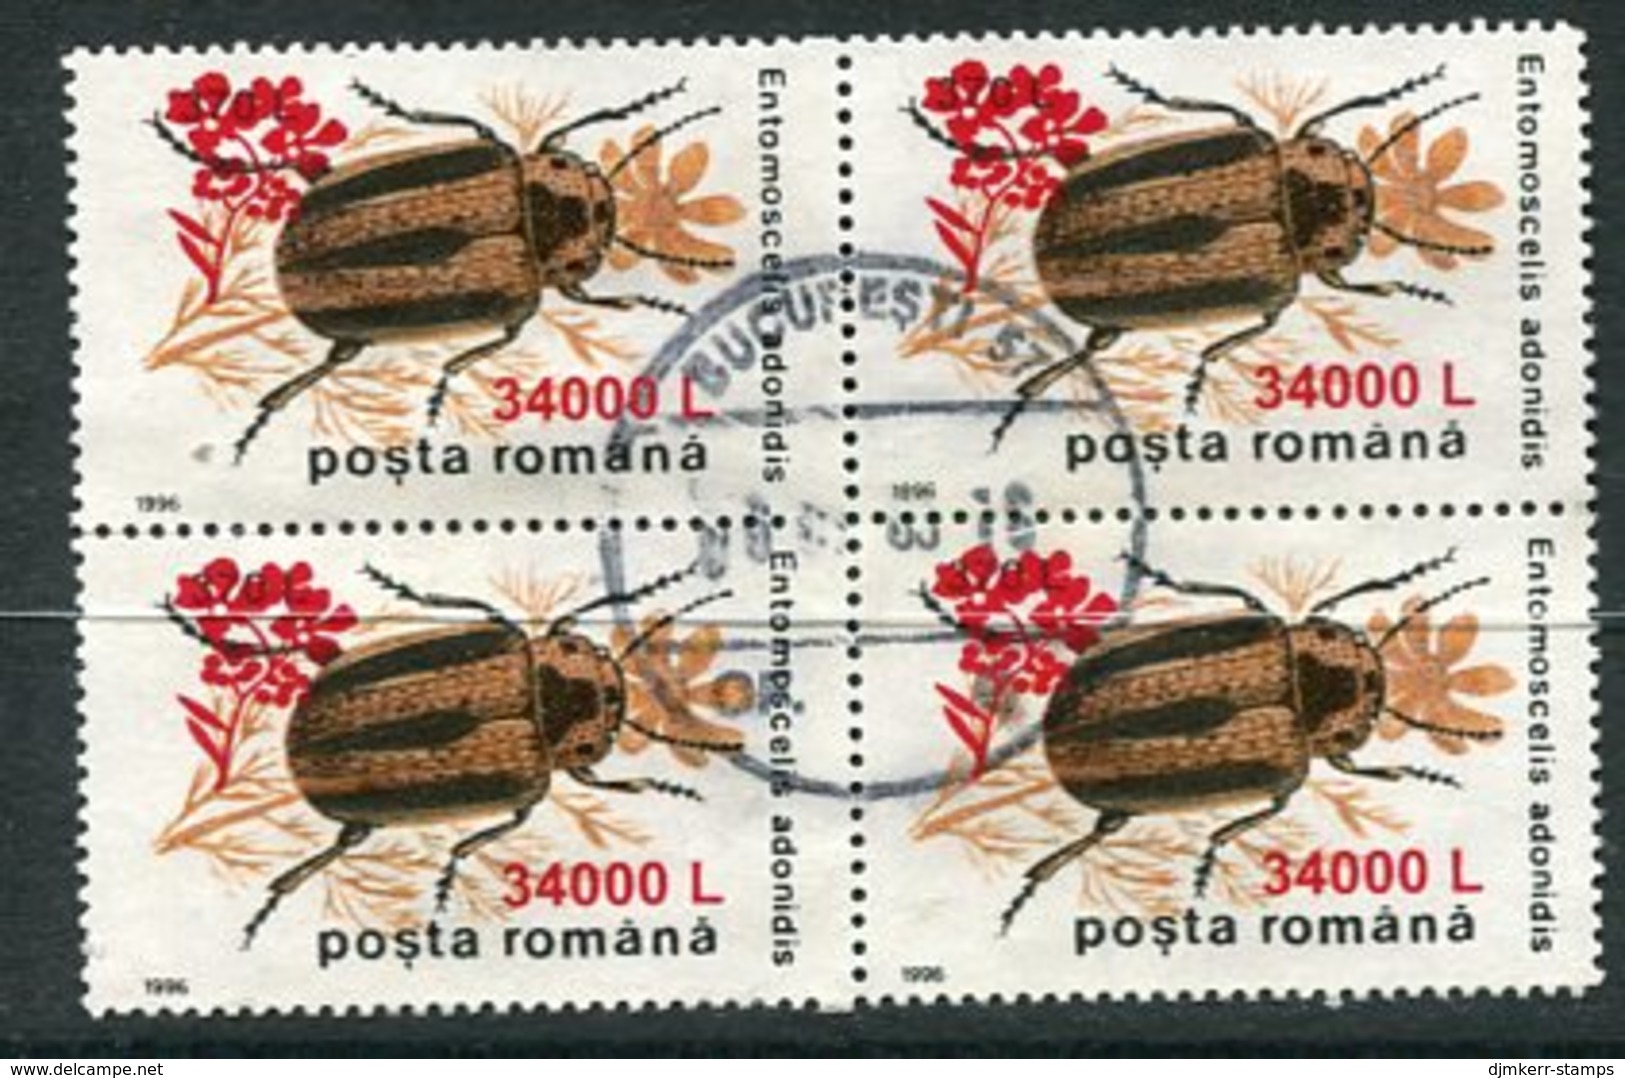 ROMANIA 2000 Surcharge 34000 L. On Insects 370 L.used Block Of 4  Michel 5498 - Gebraucht